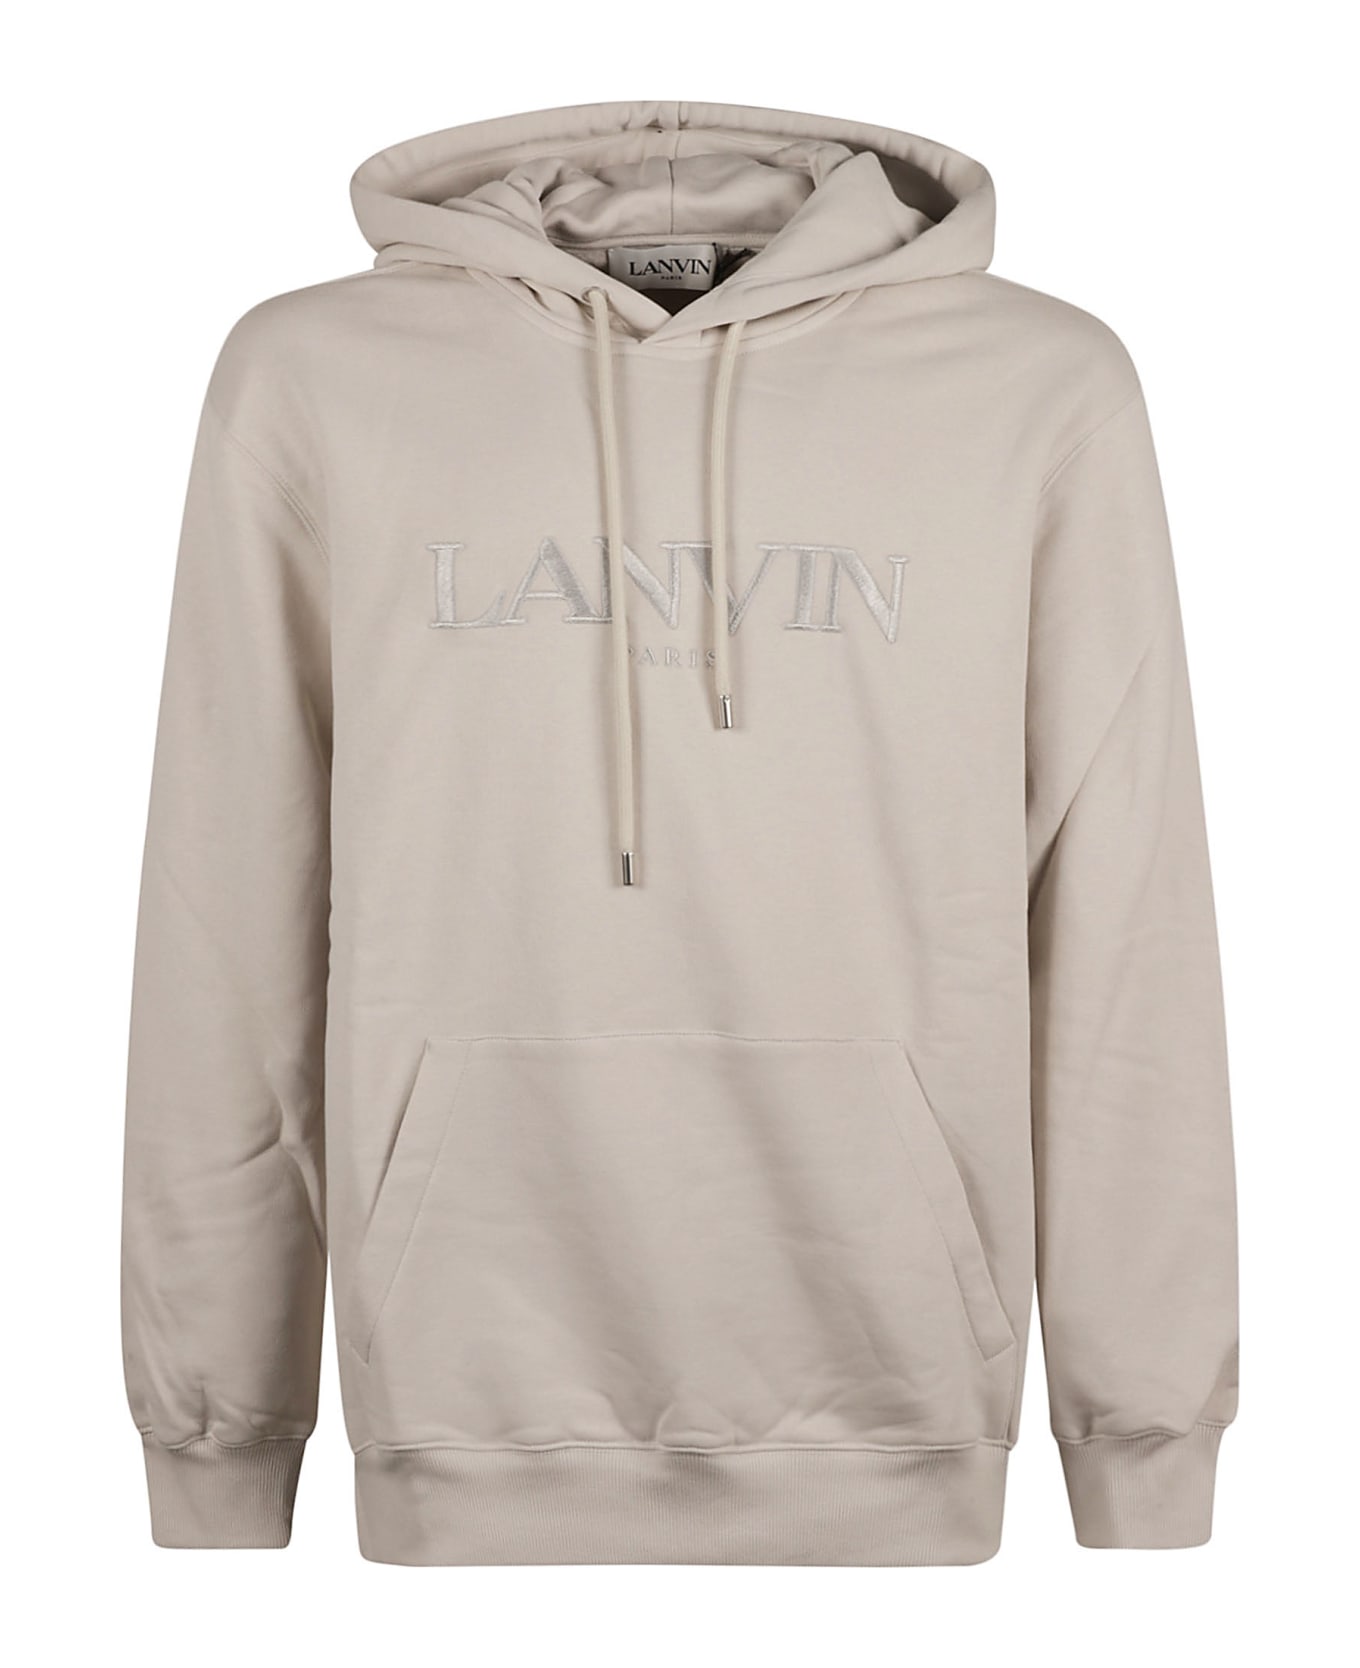 Lanvin Logo Embroidered Hoodie - Mastic